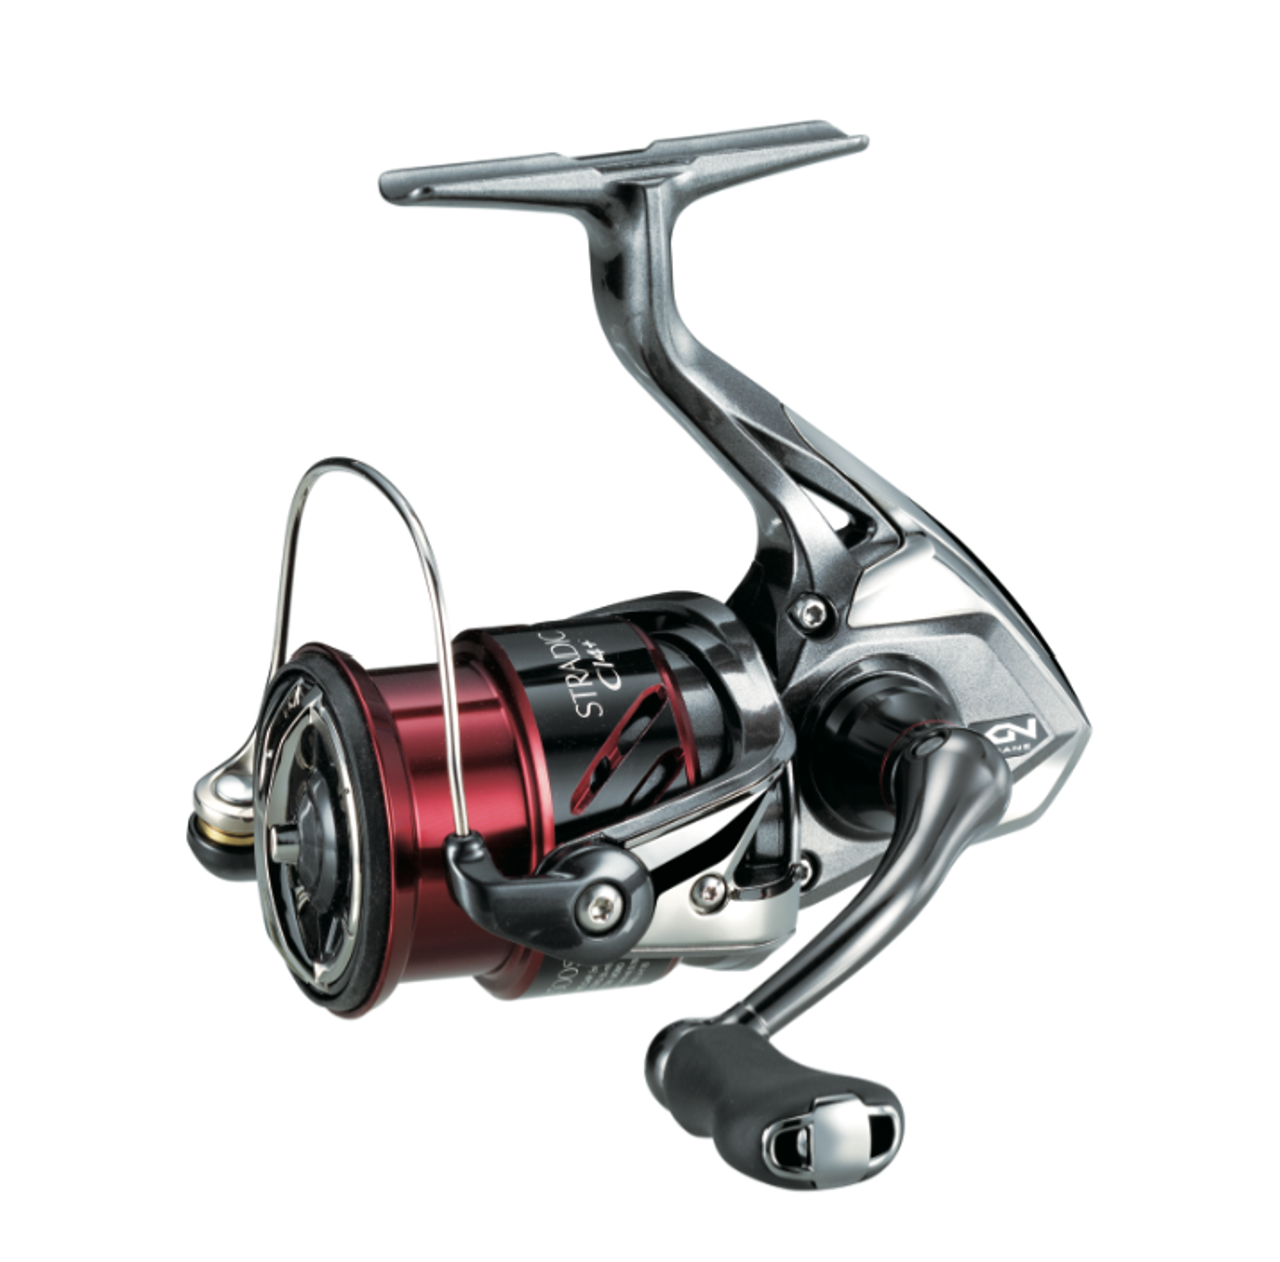 https://cdn11.bigcommerce.com/s-d63enkb3ep/images/stencil/1280x1280/products/4707/4762/Shimano-stradic-ci4_-spinning-reel__92139.1571192490.png?c=2